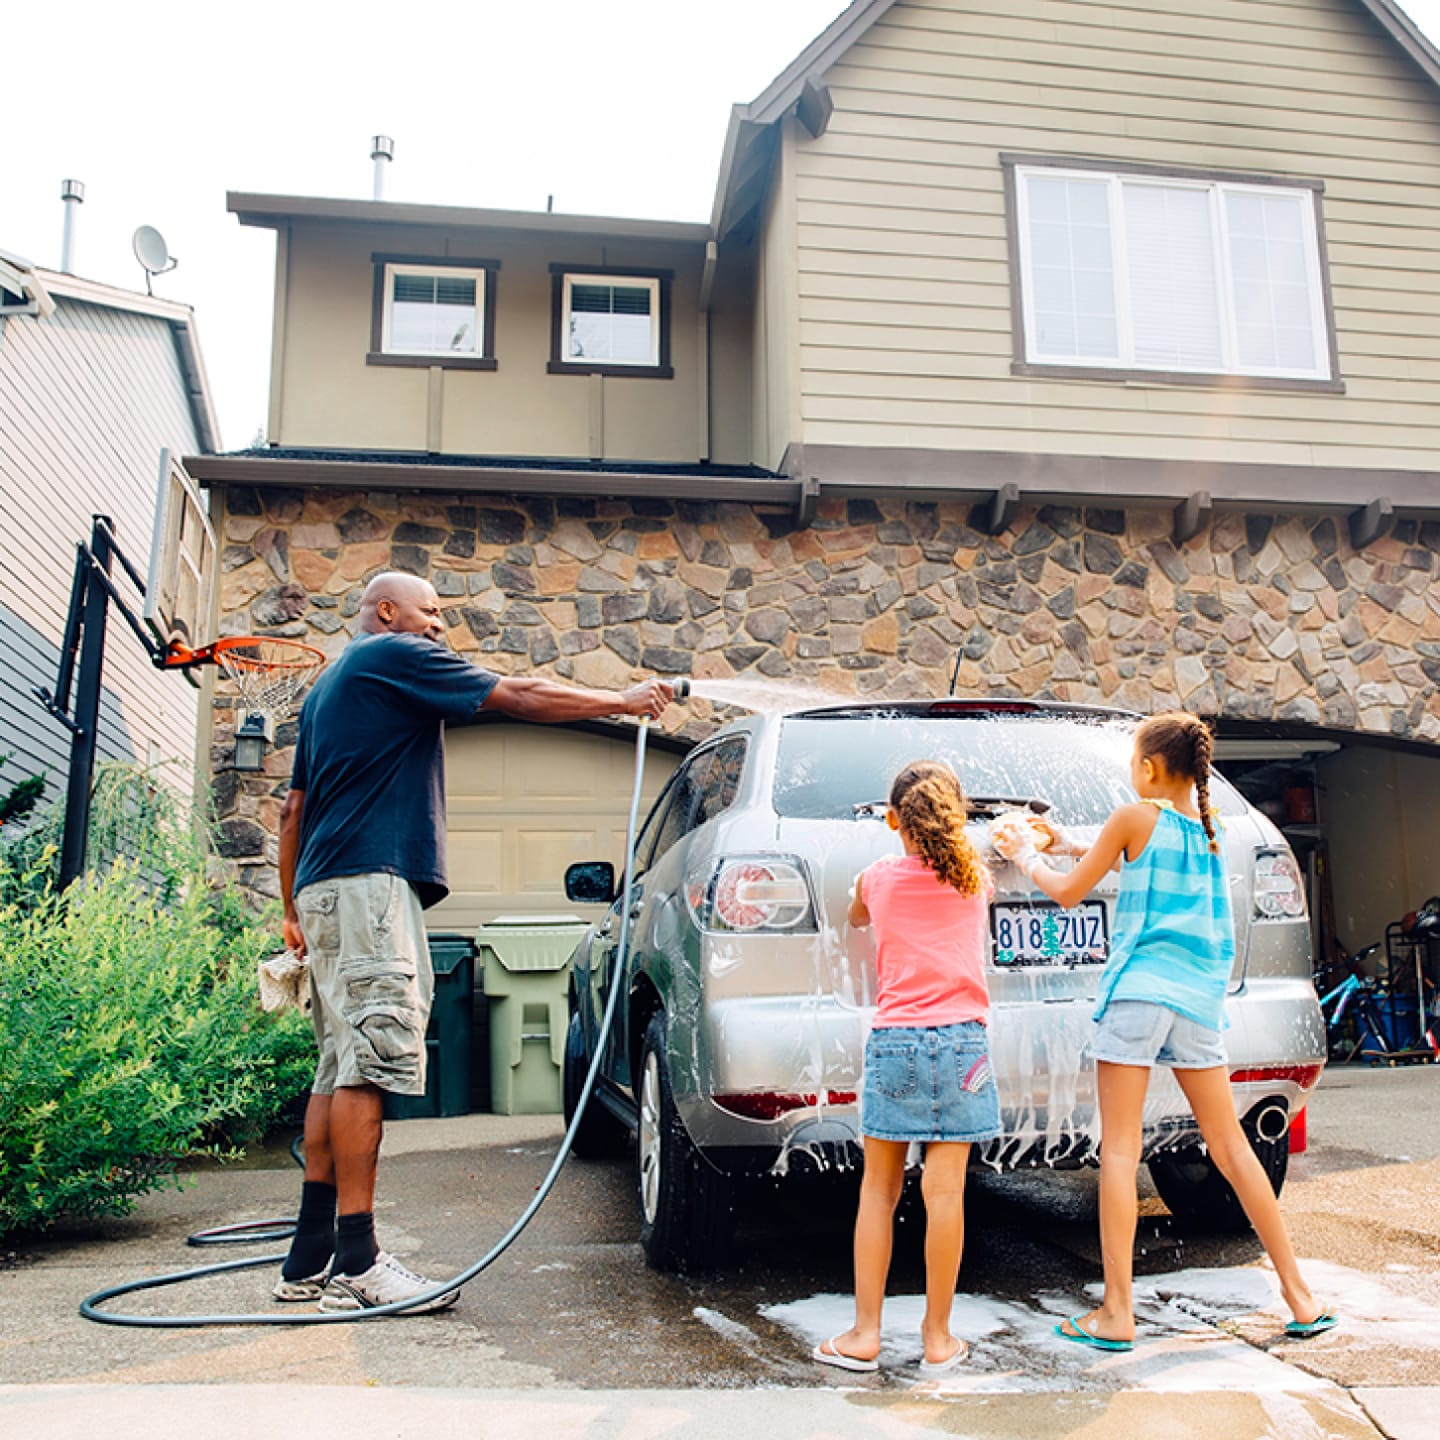 Family washing car in home driveway.